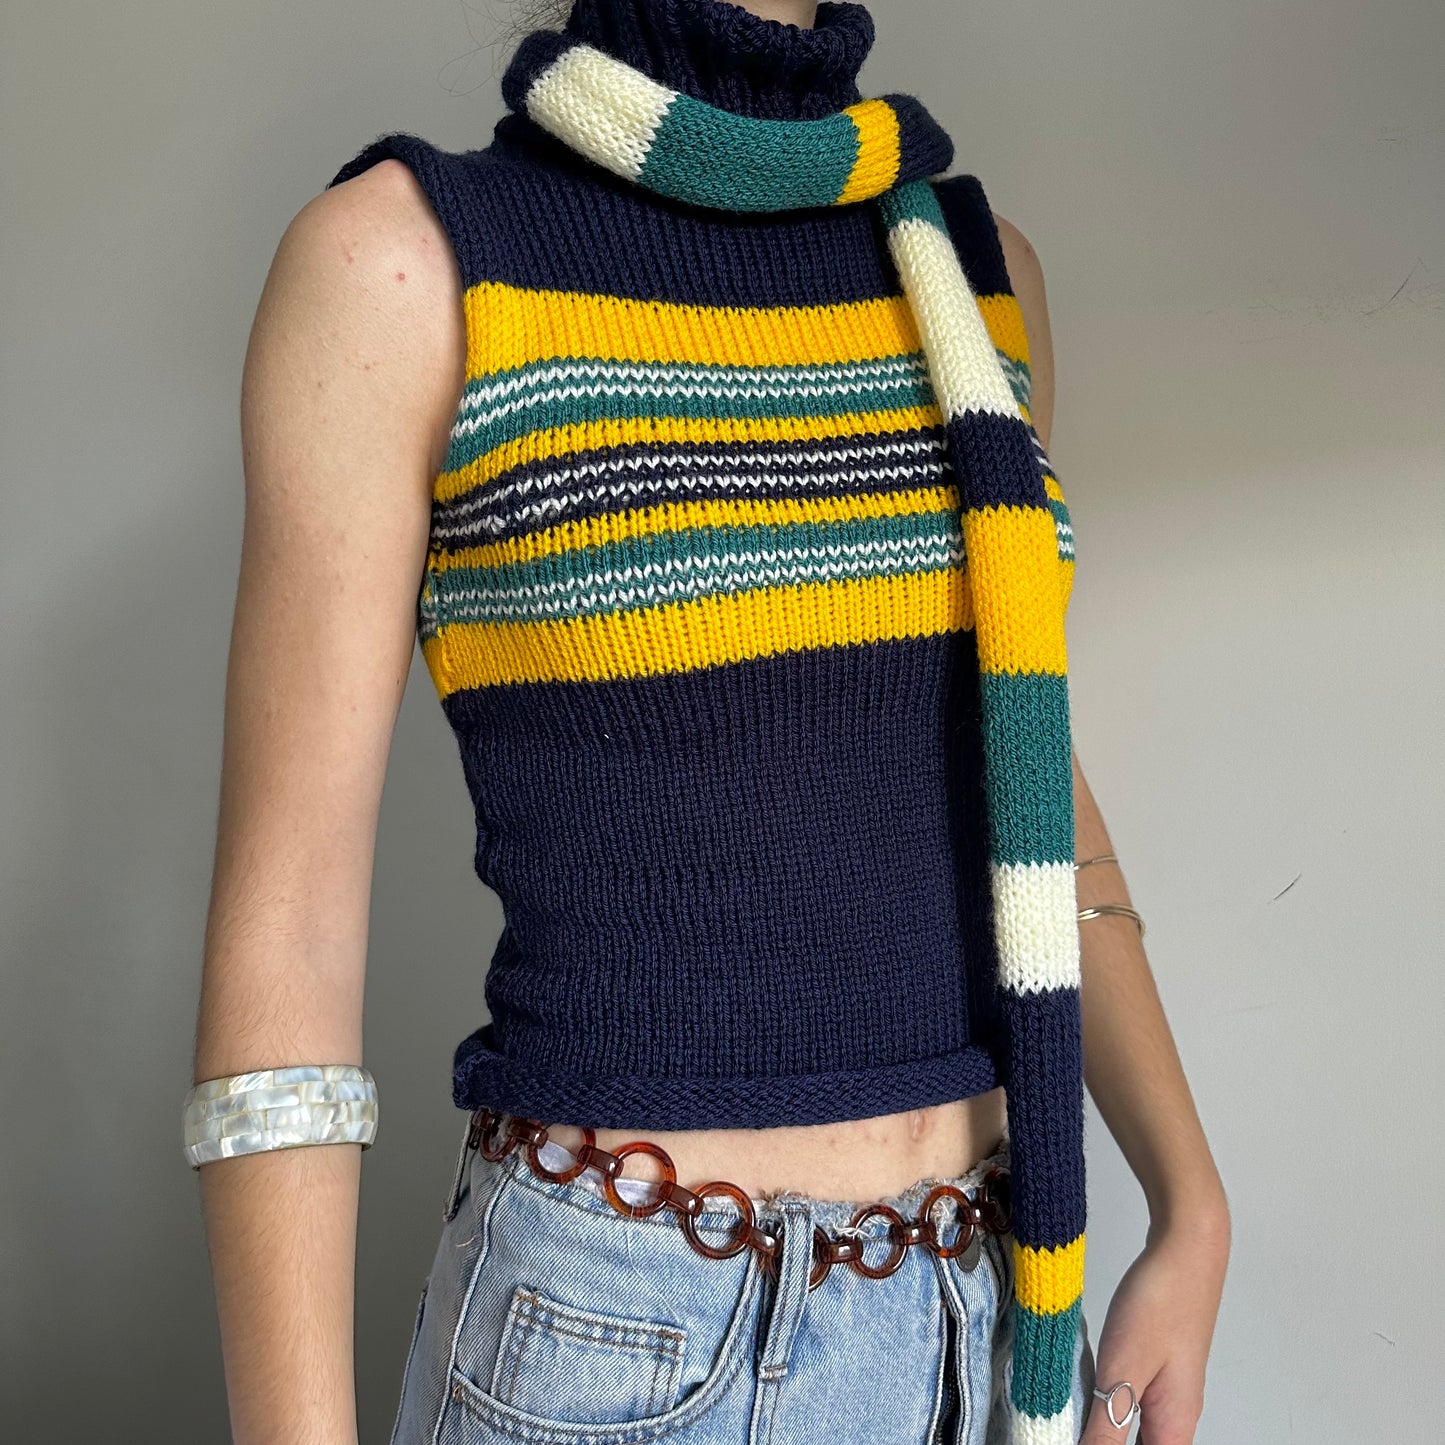 Handmade knitted stripy skinny scarf in navy, cream, yellow and teal